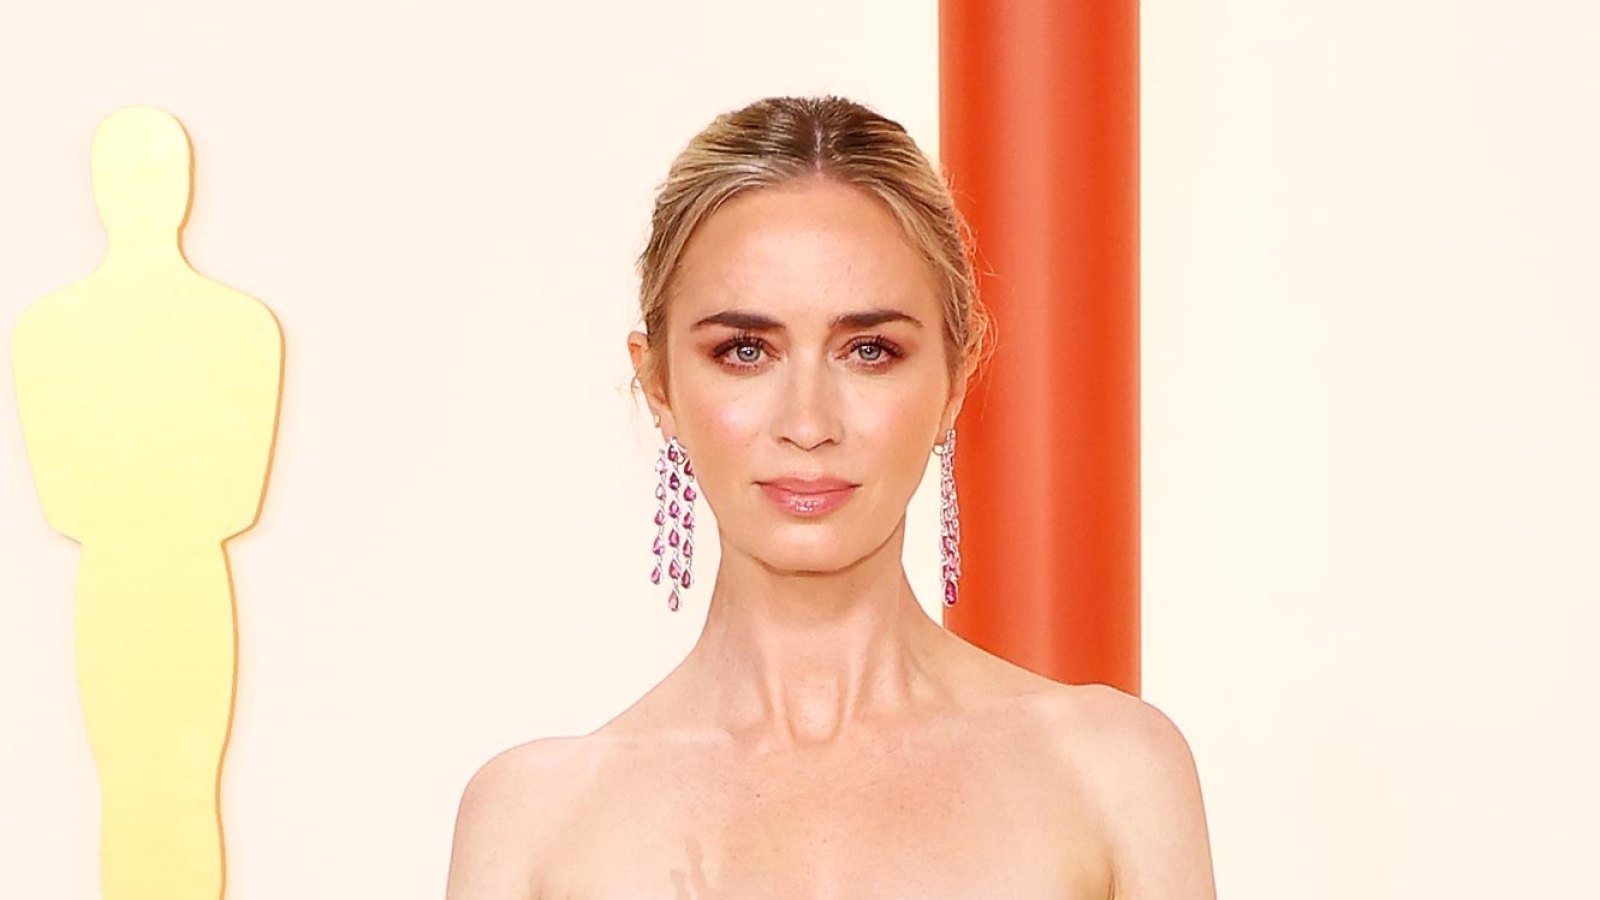 Emily Blunt Addresses Resurfaced Body-Shaming Comments Apologizes for Insensitive Remarks 258